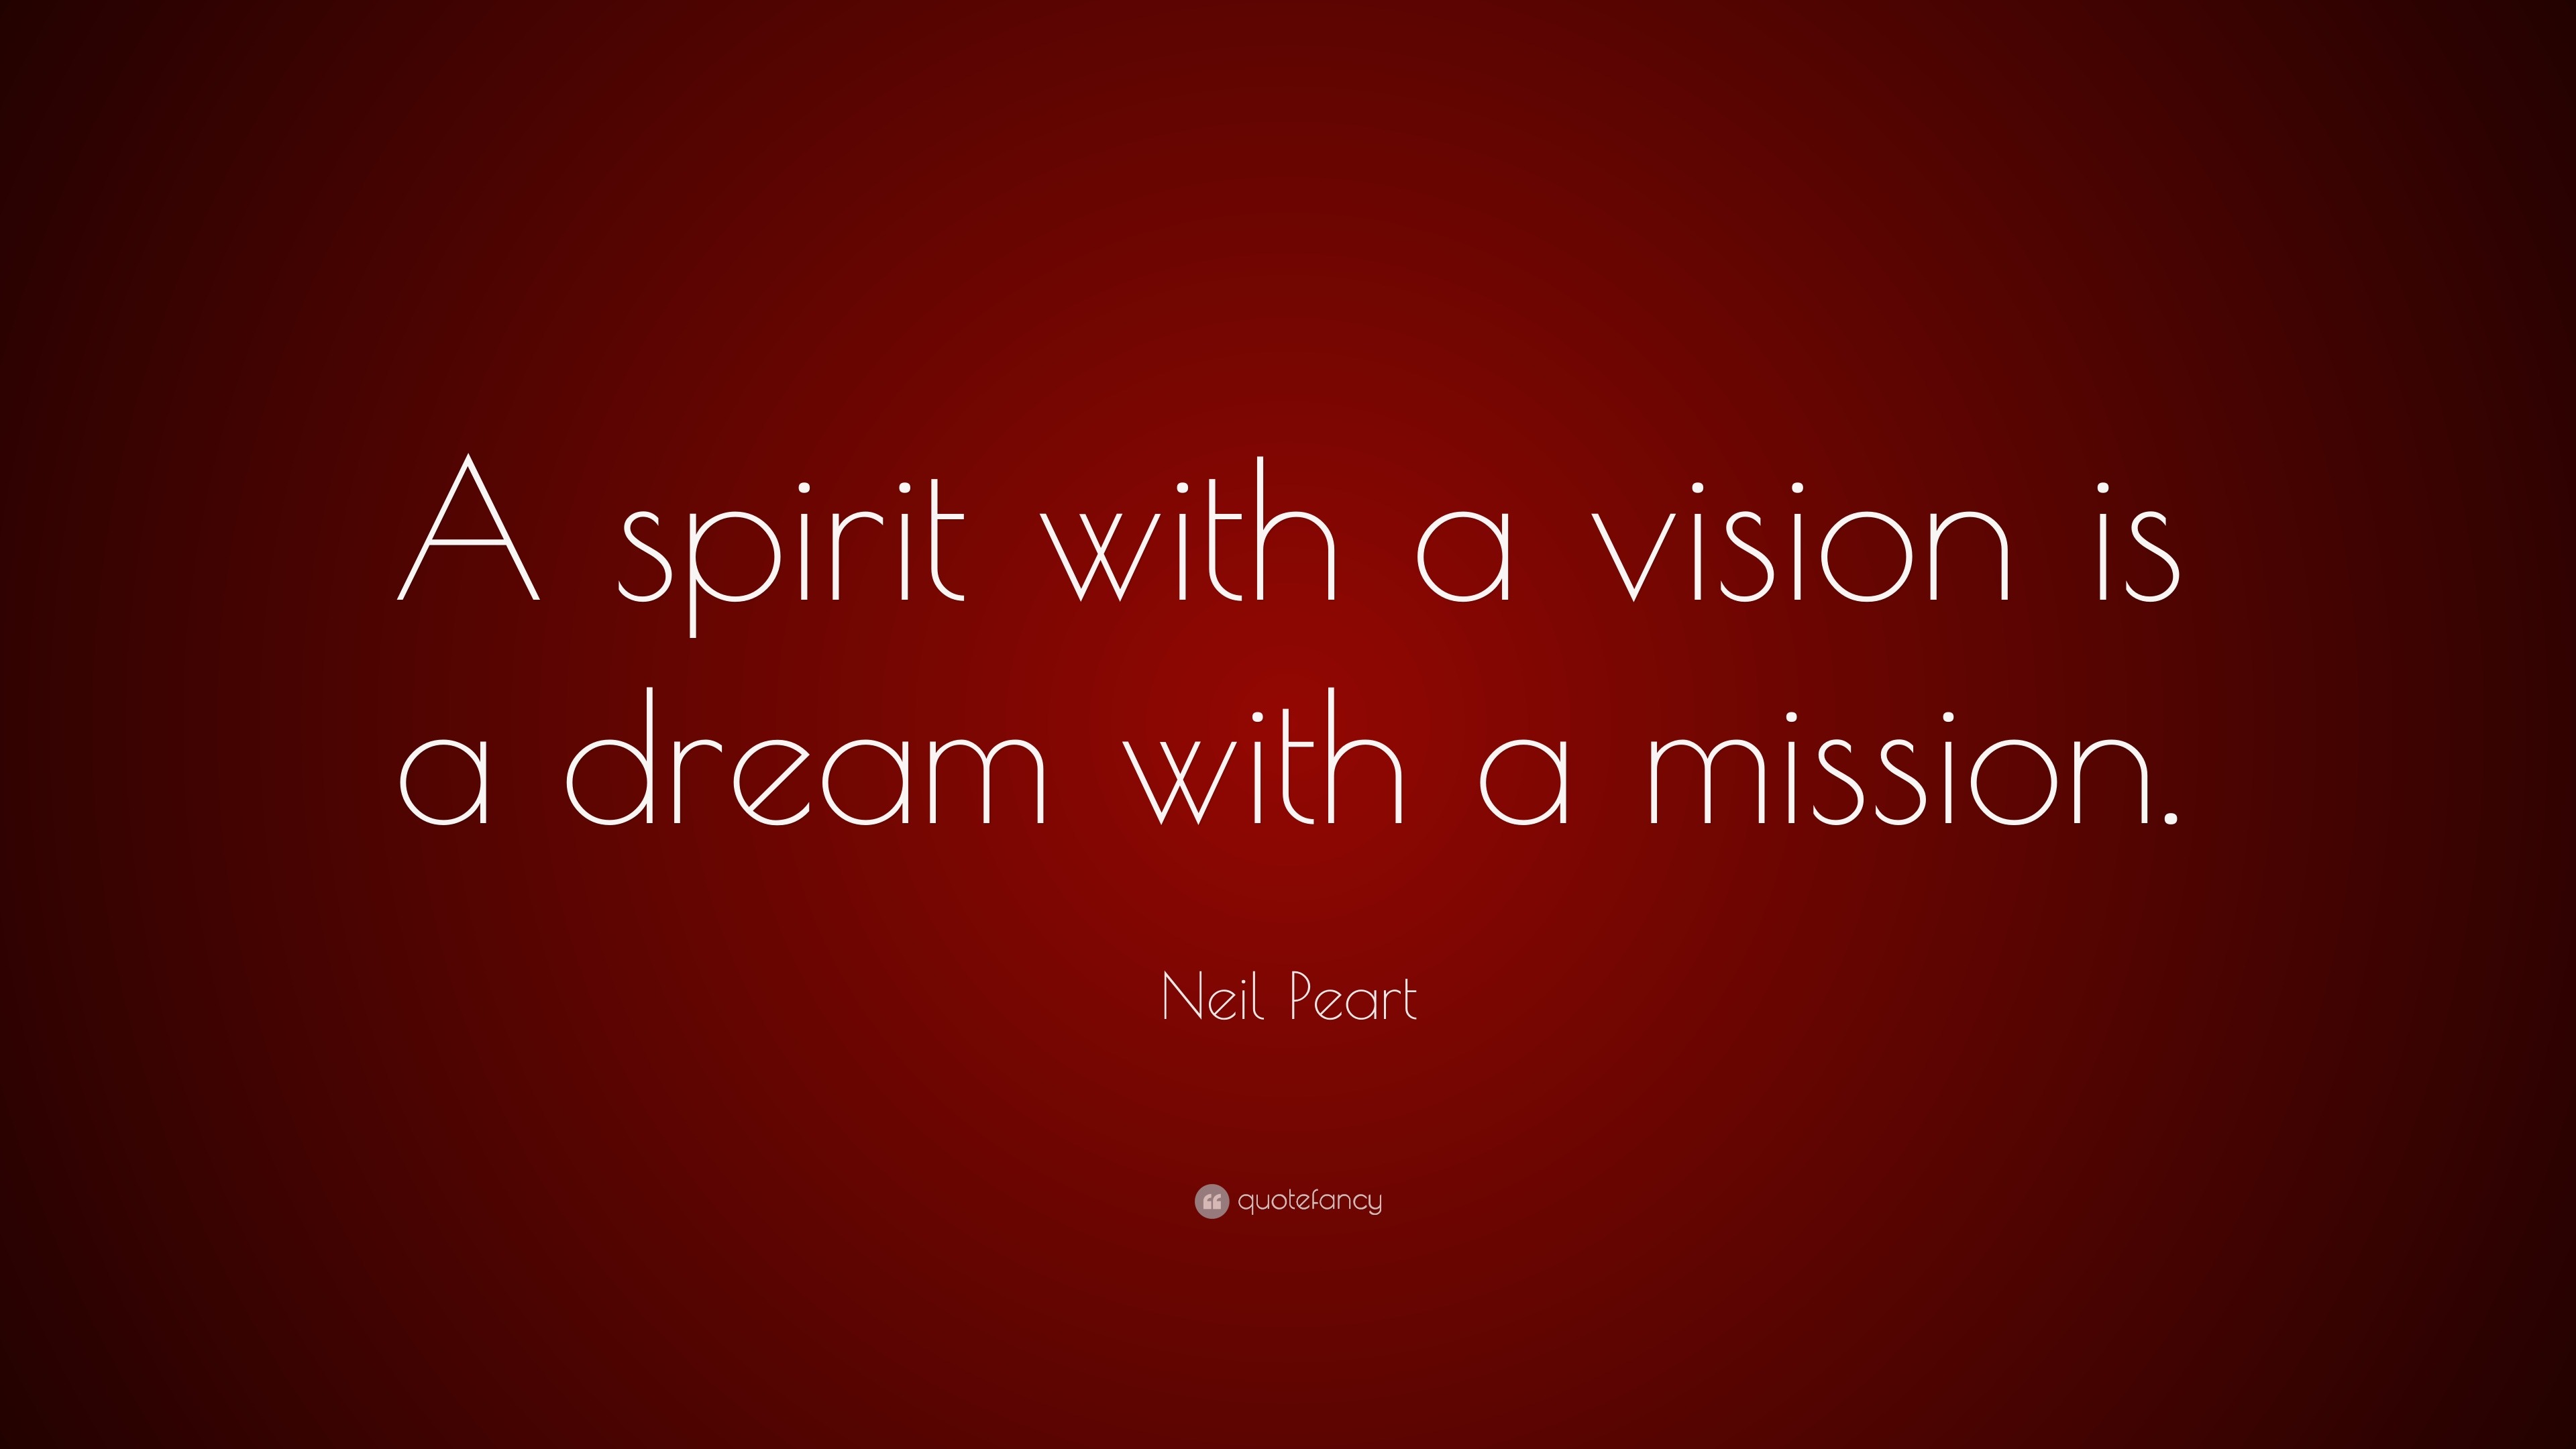 Neil Peart Quote “A spirit with a vision is a dream with